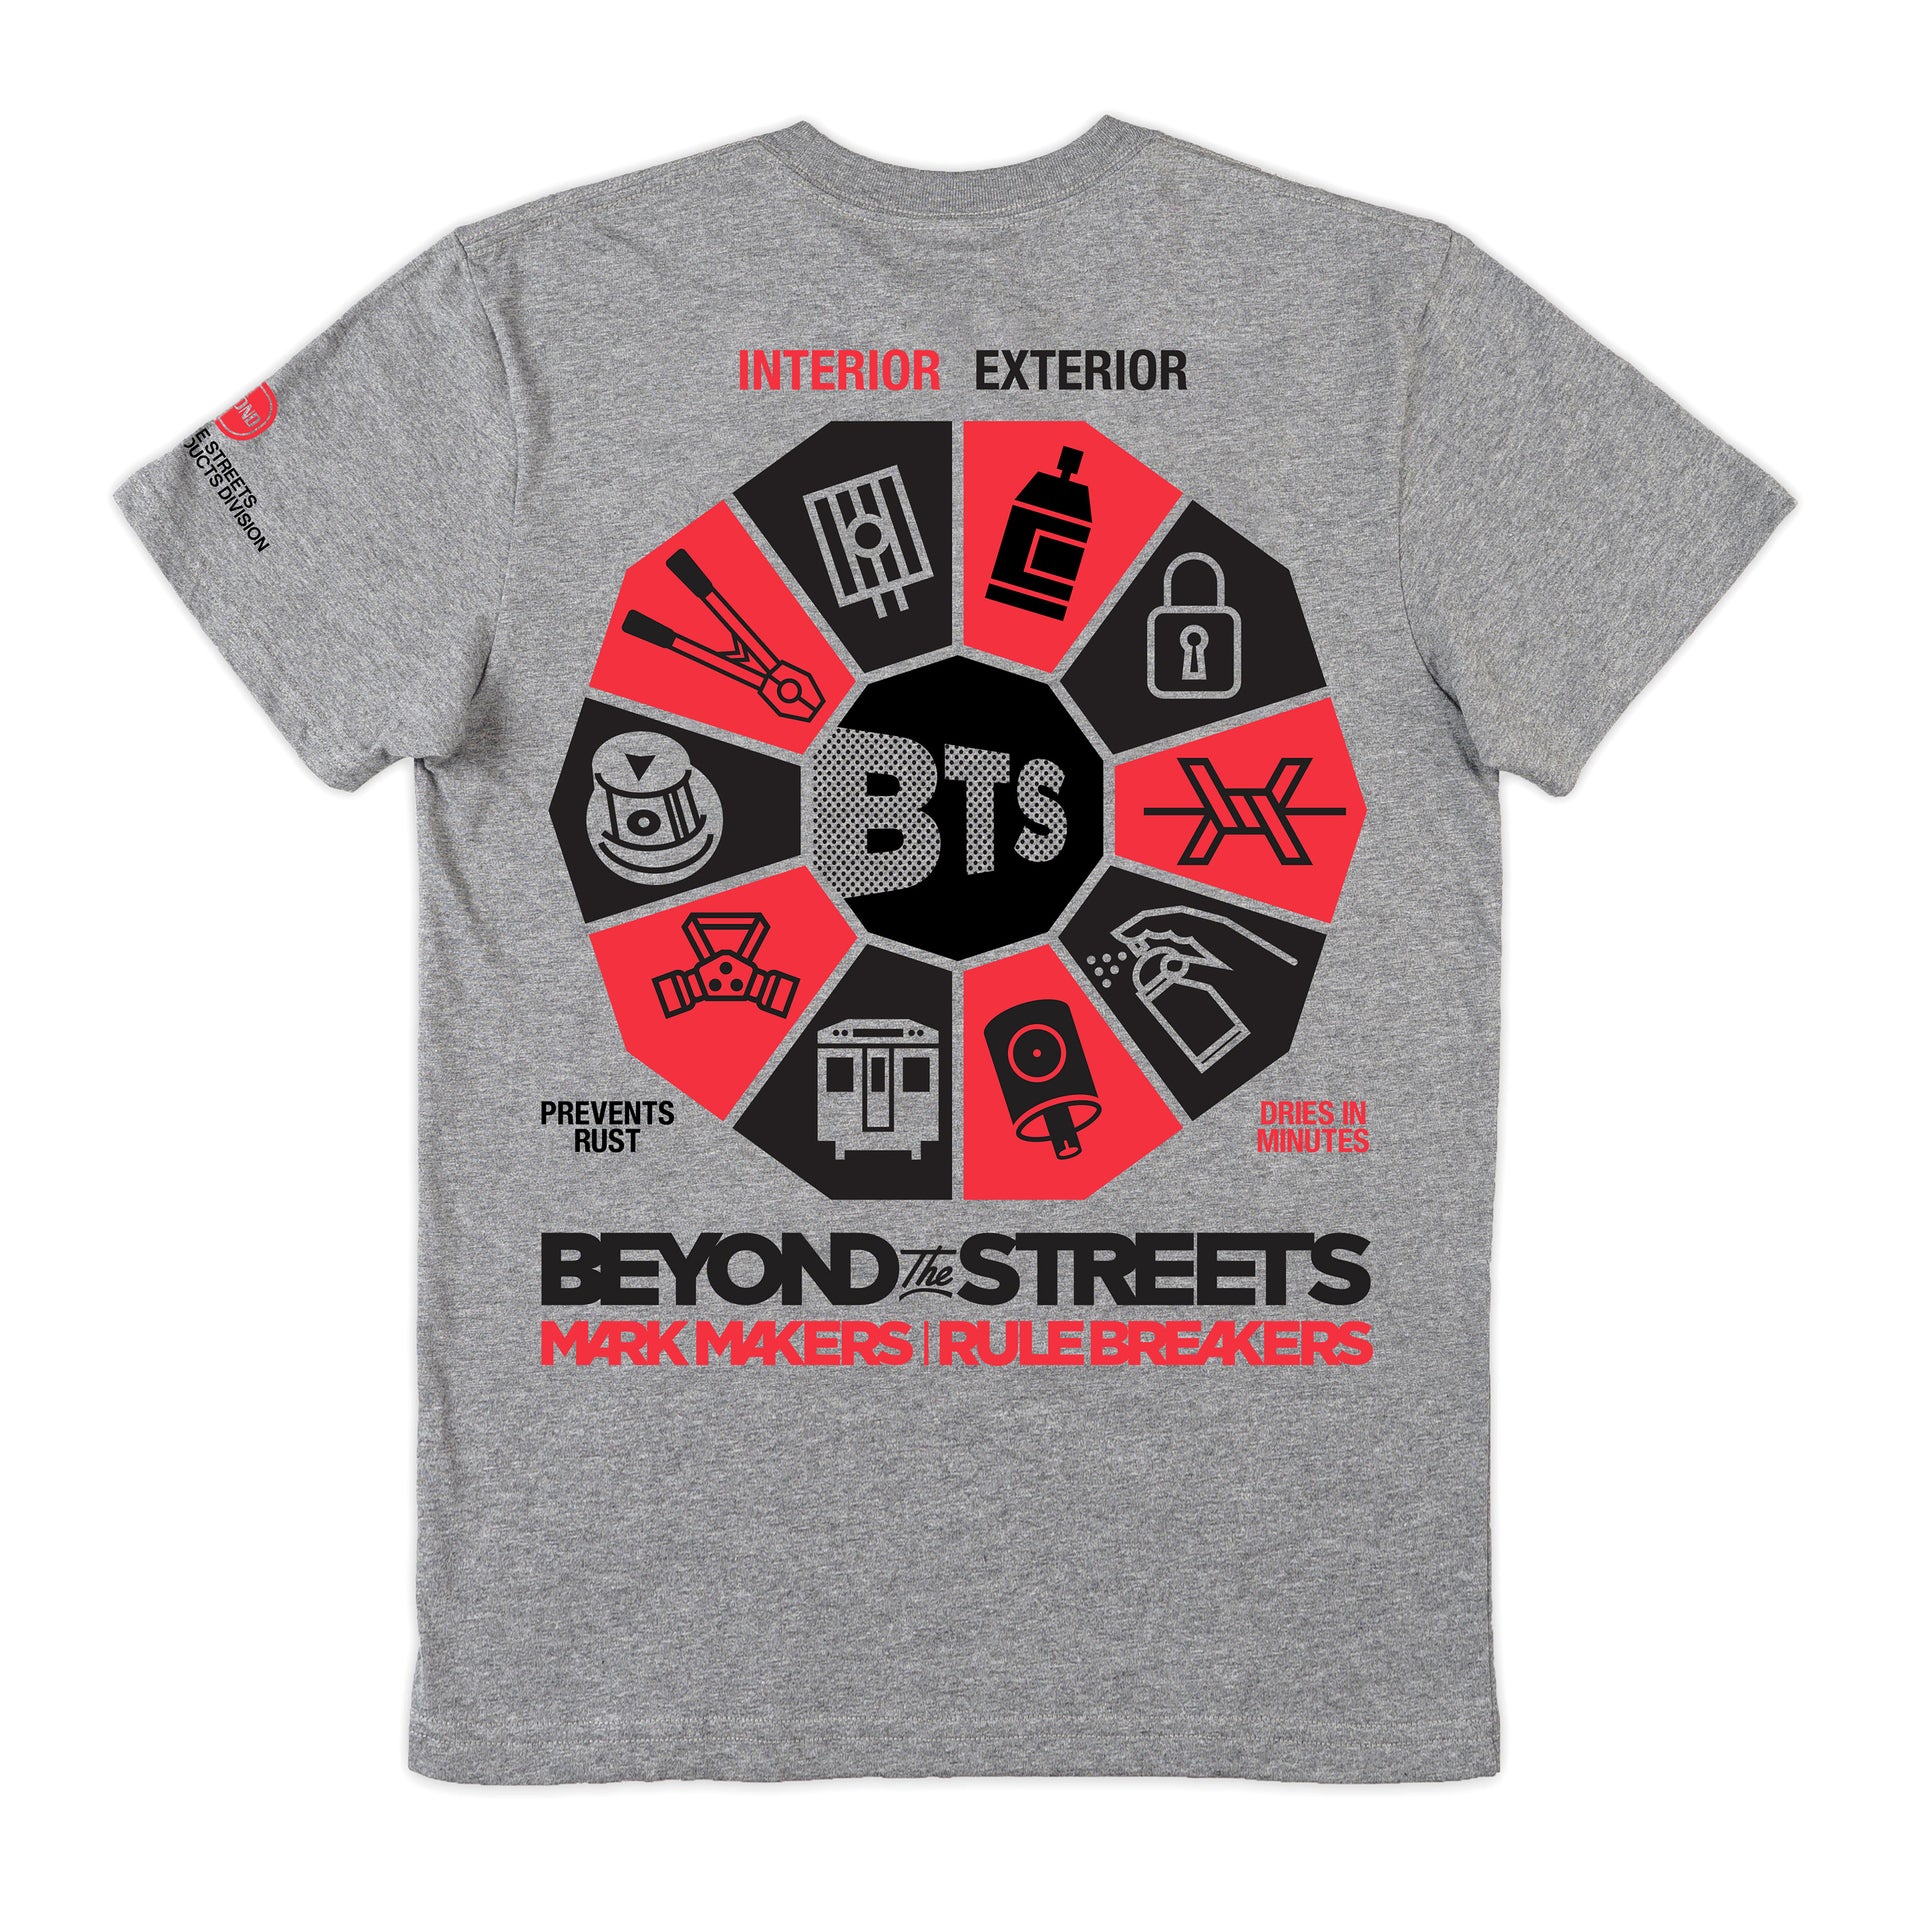 BEYOND THE STREETS gray t shirt 